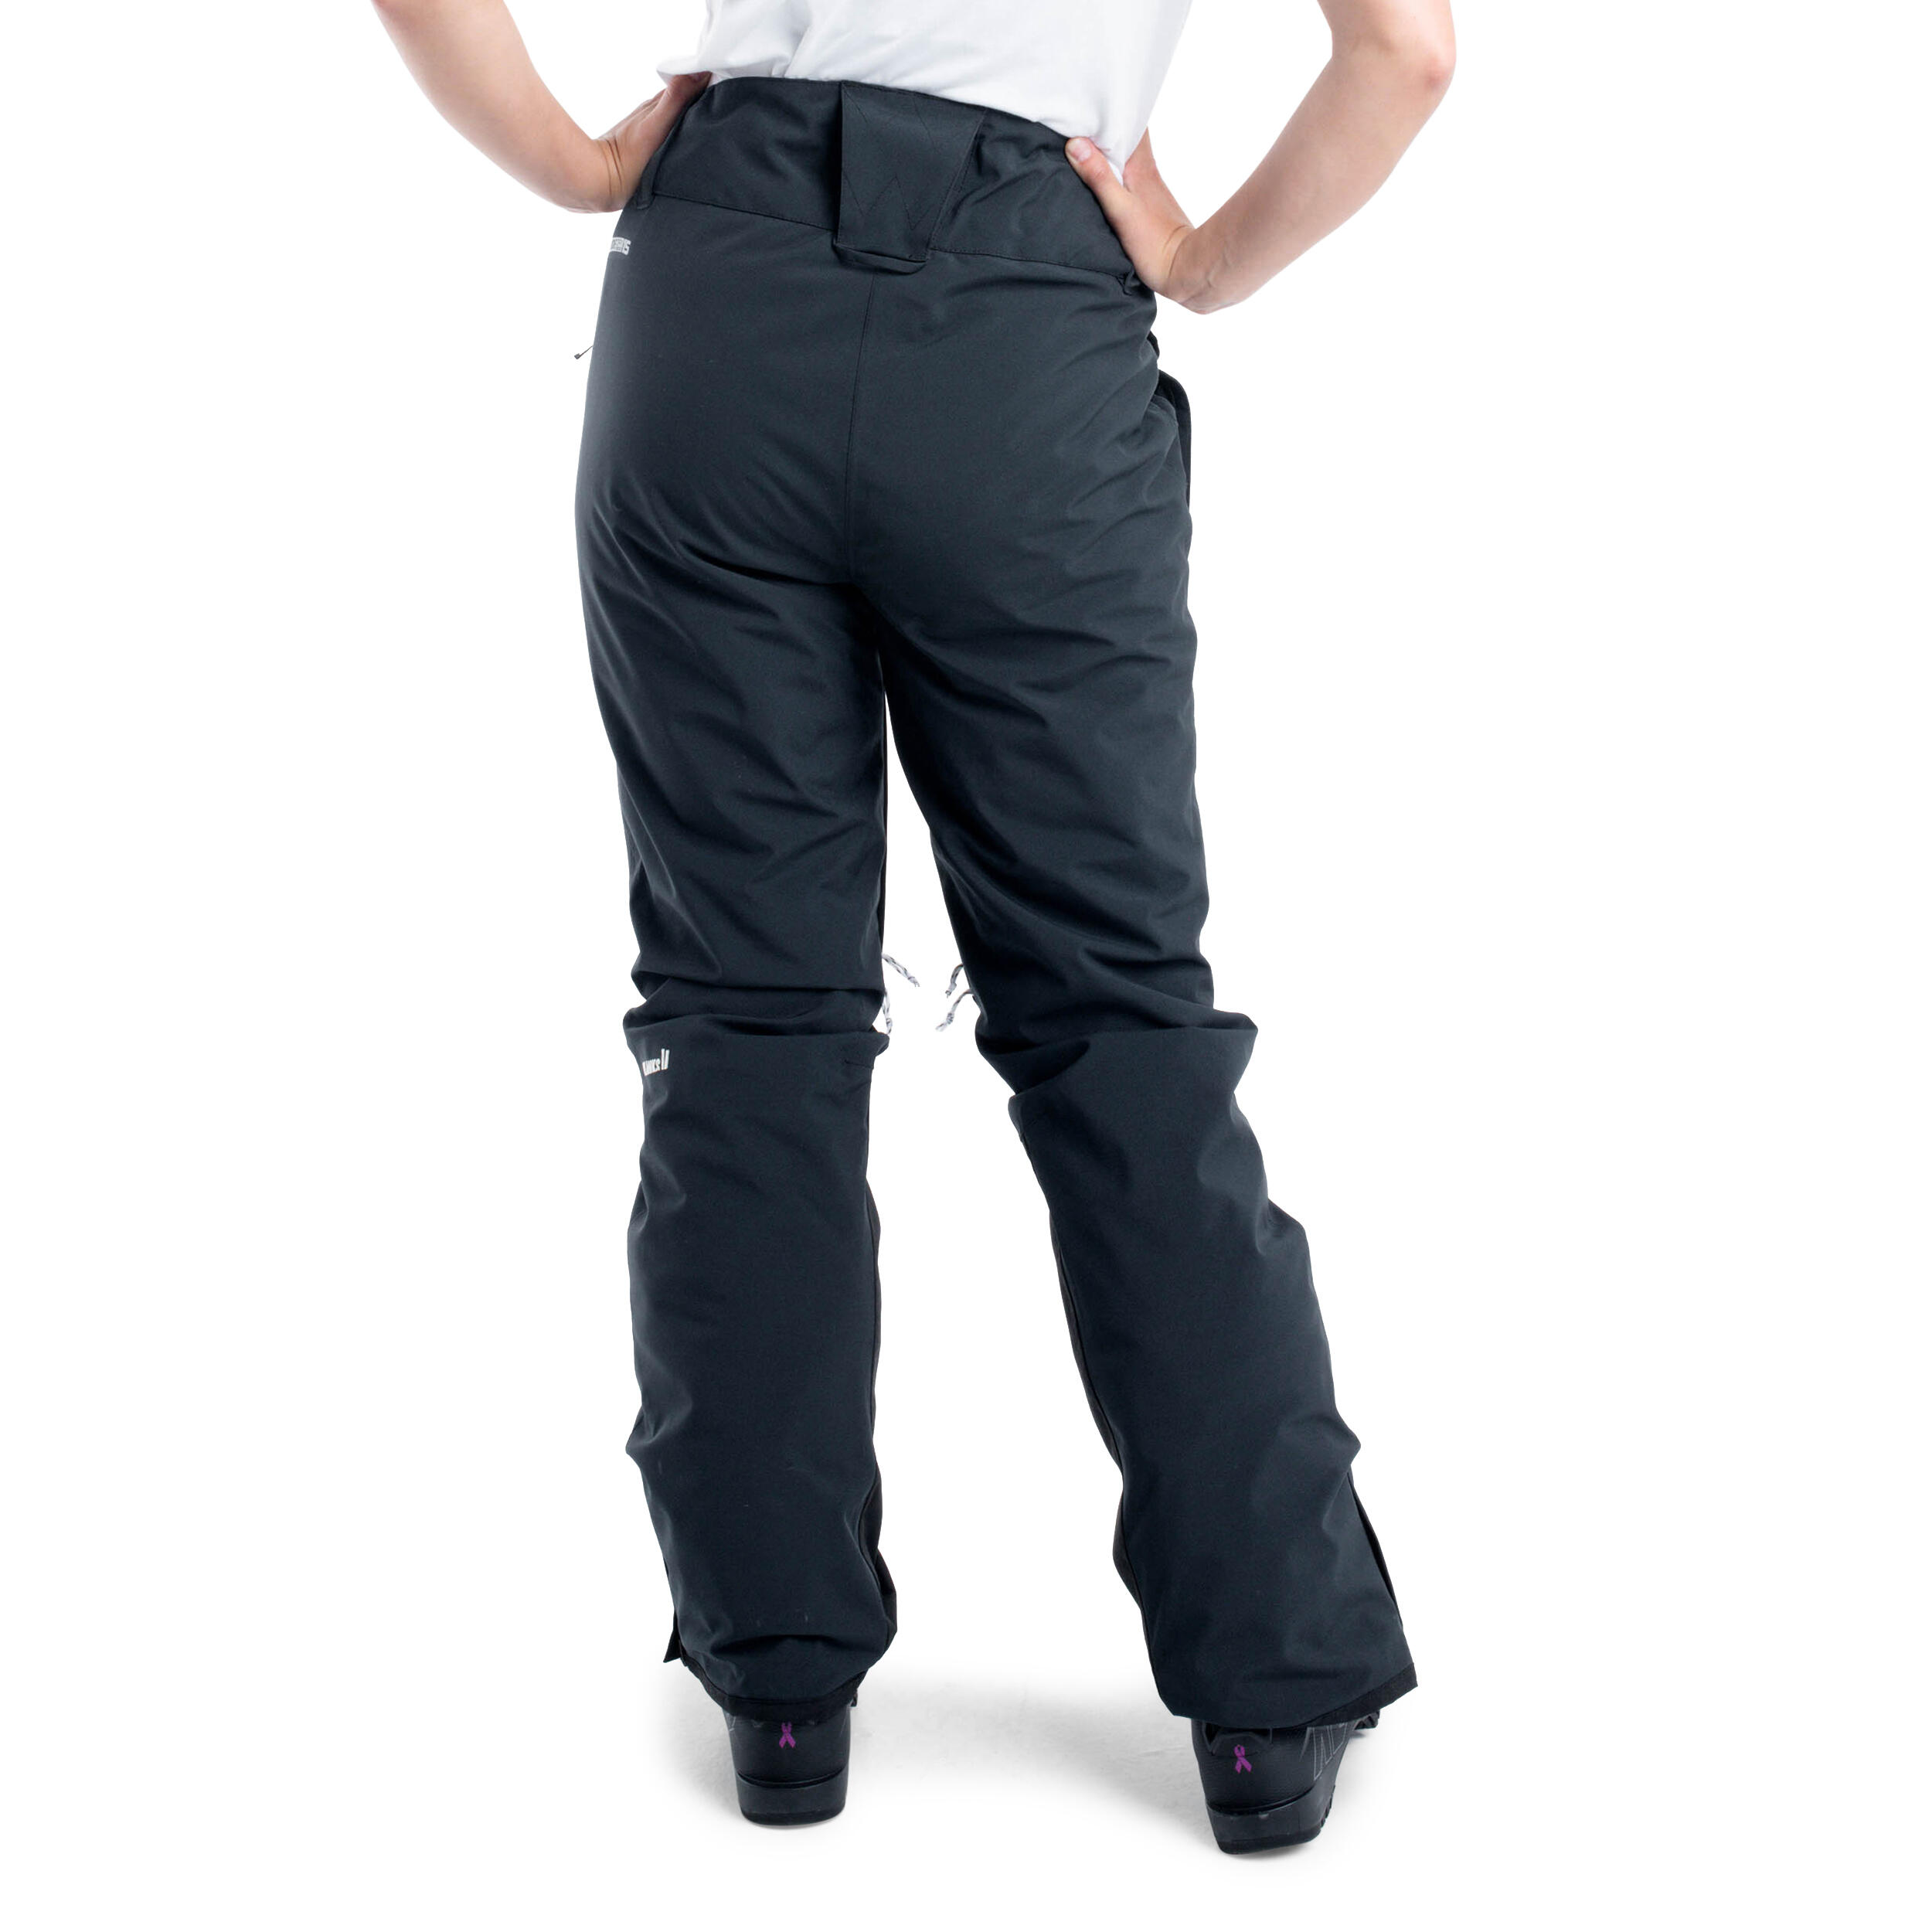 Planks All-Time Women's Insulated Pants in Black - Ladies Sports Trousers 3/3